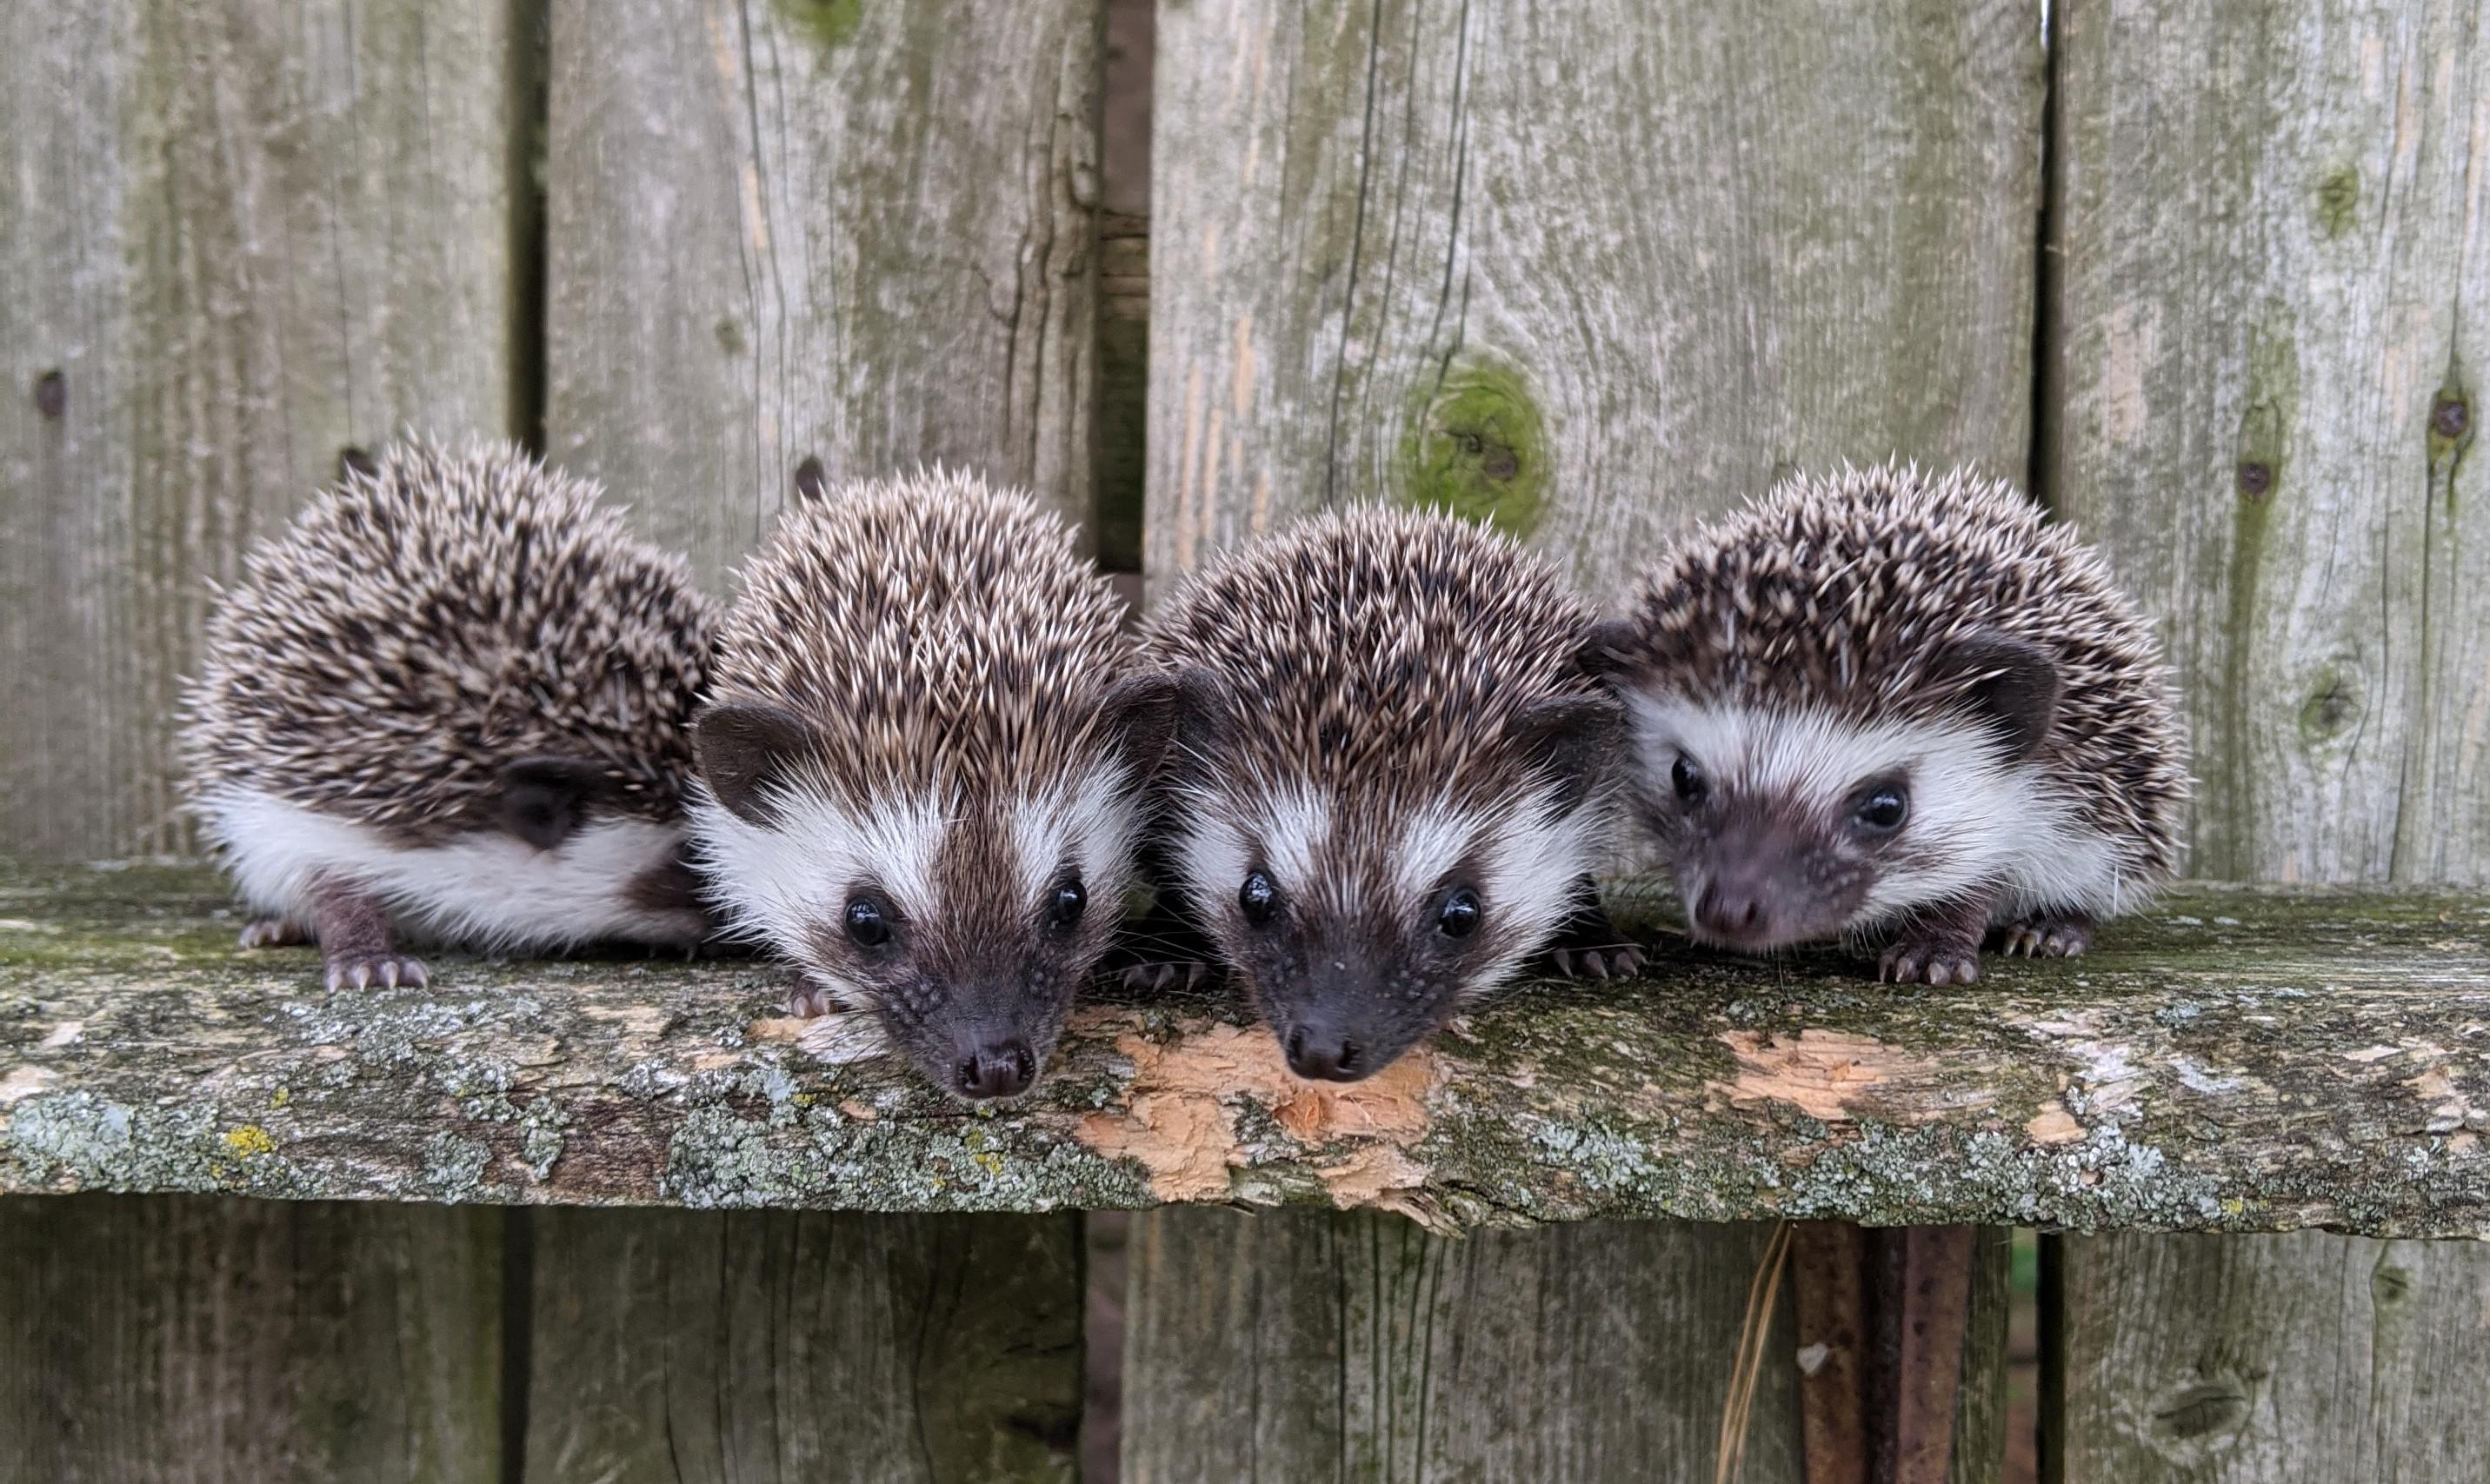 What is a hedgehog group called?